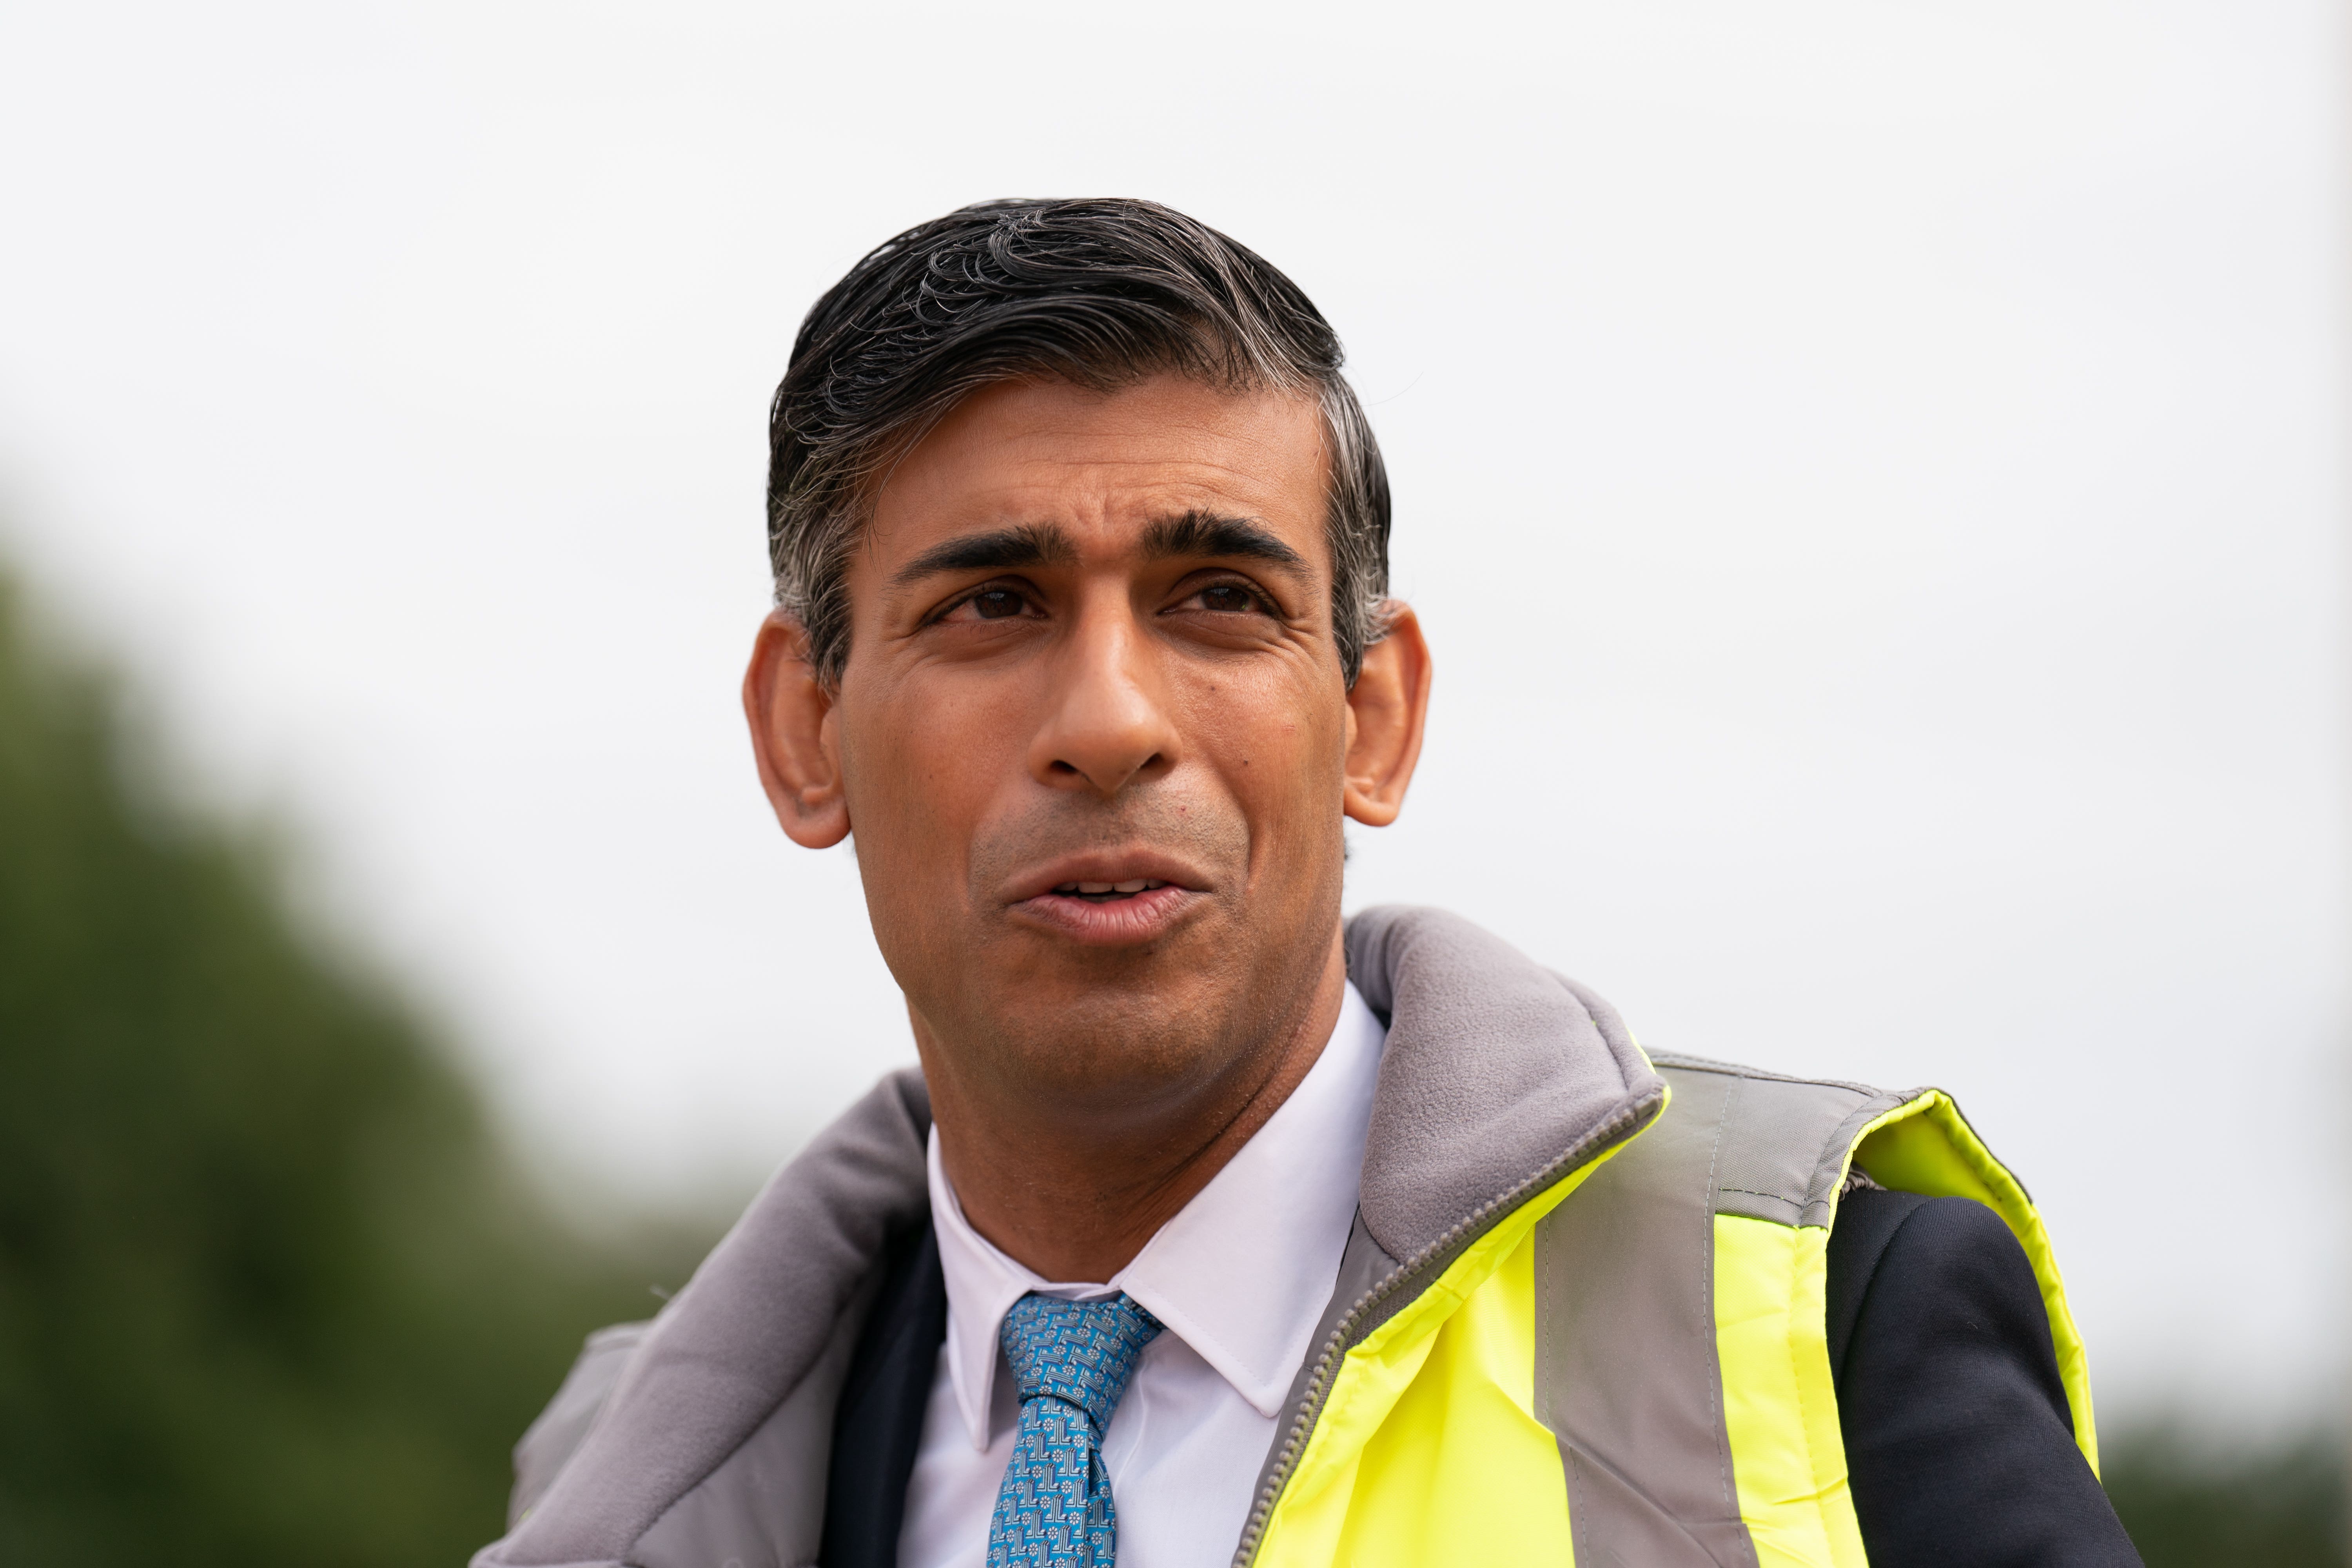 Rishi Sunak has denied claims he cut plans to build more new schools during his time as chancellor (Joe Giddens/PA)